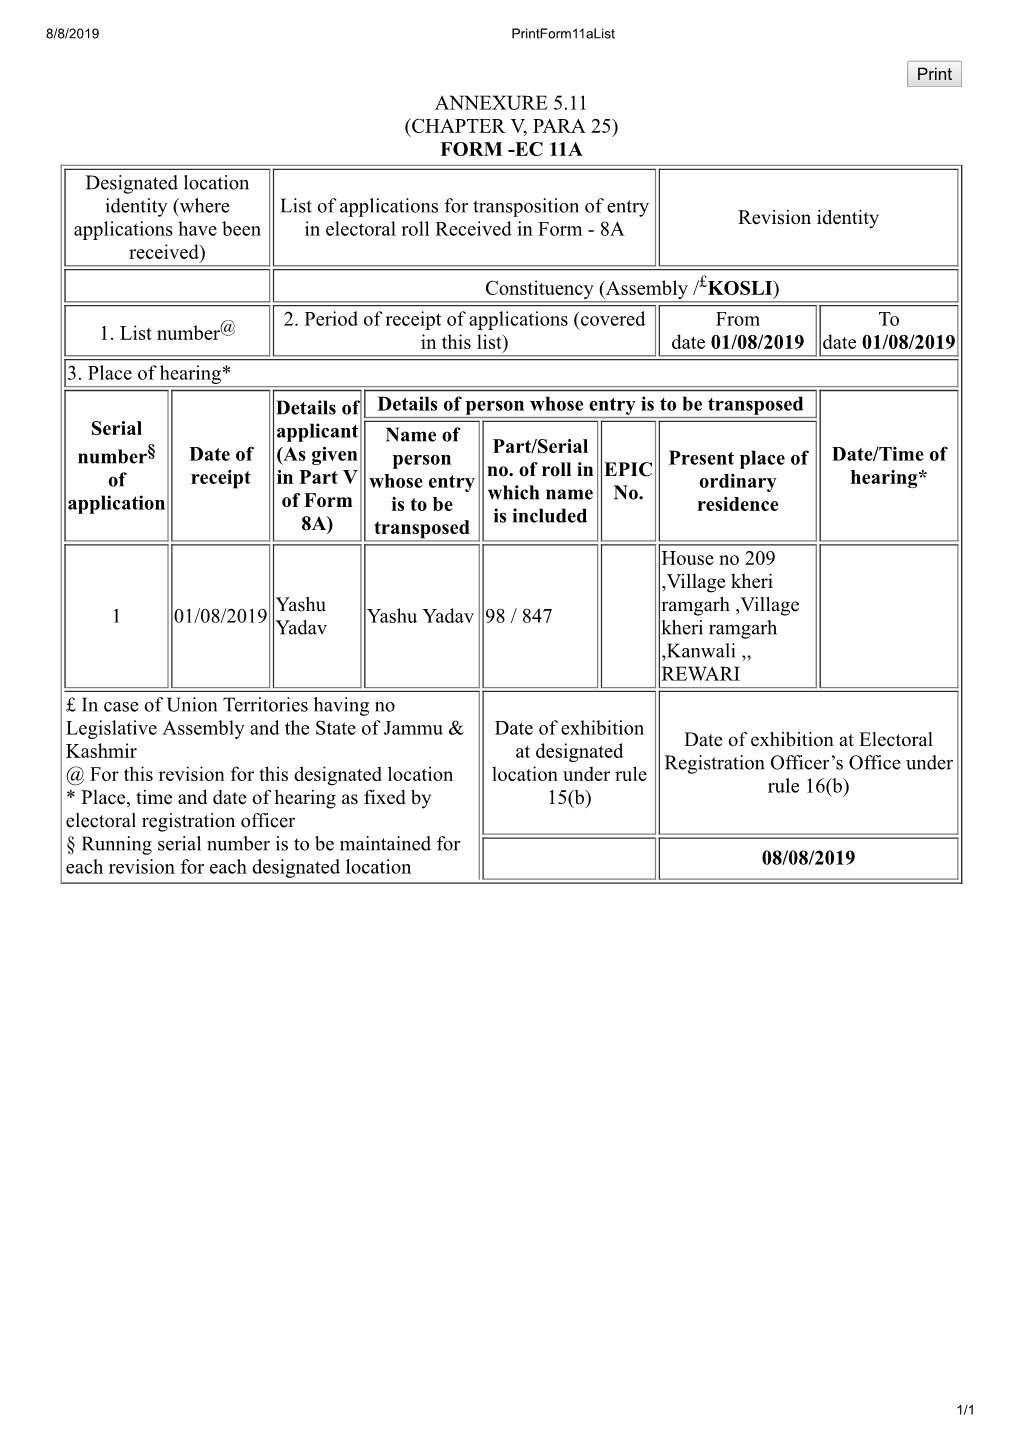 ANNEXURE 5.11 (CHAPTER V, PARA 25) FORM -EC 11A Designated Location Identity (Where Applications Have Been Received) List Of